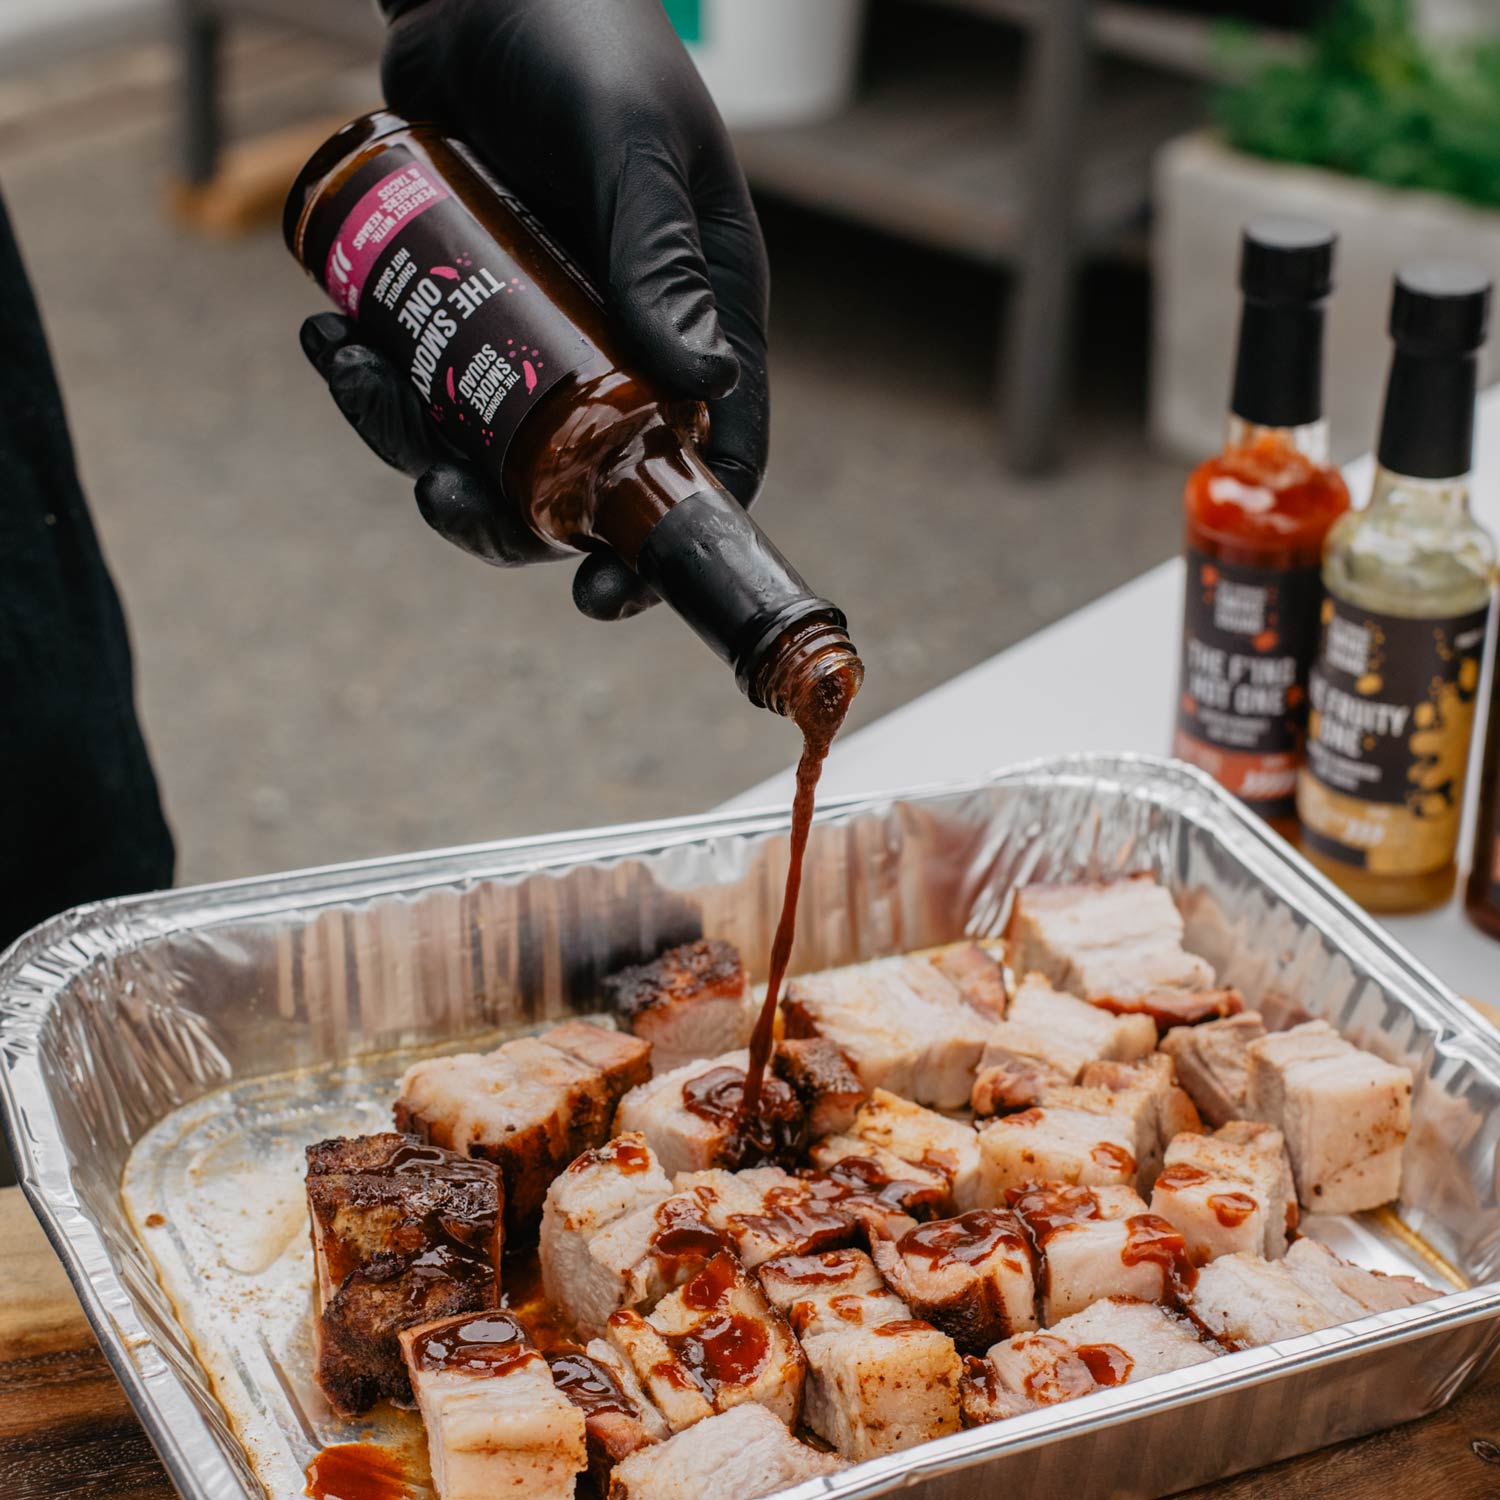 Chipotle hot sauce is poured over BBQ'd pork